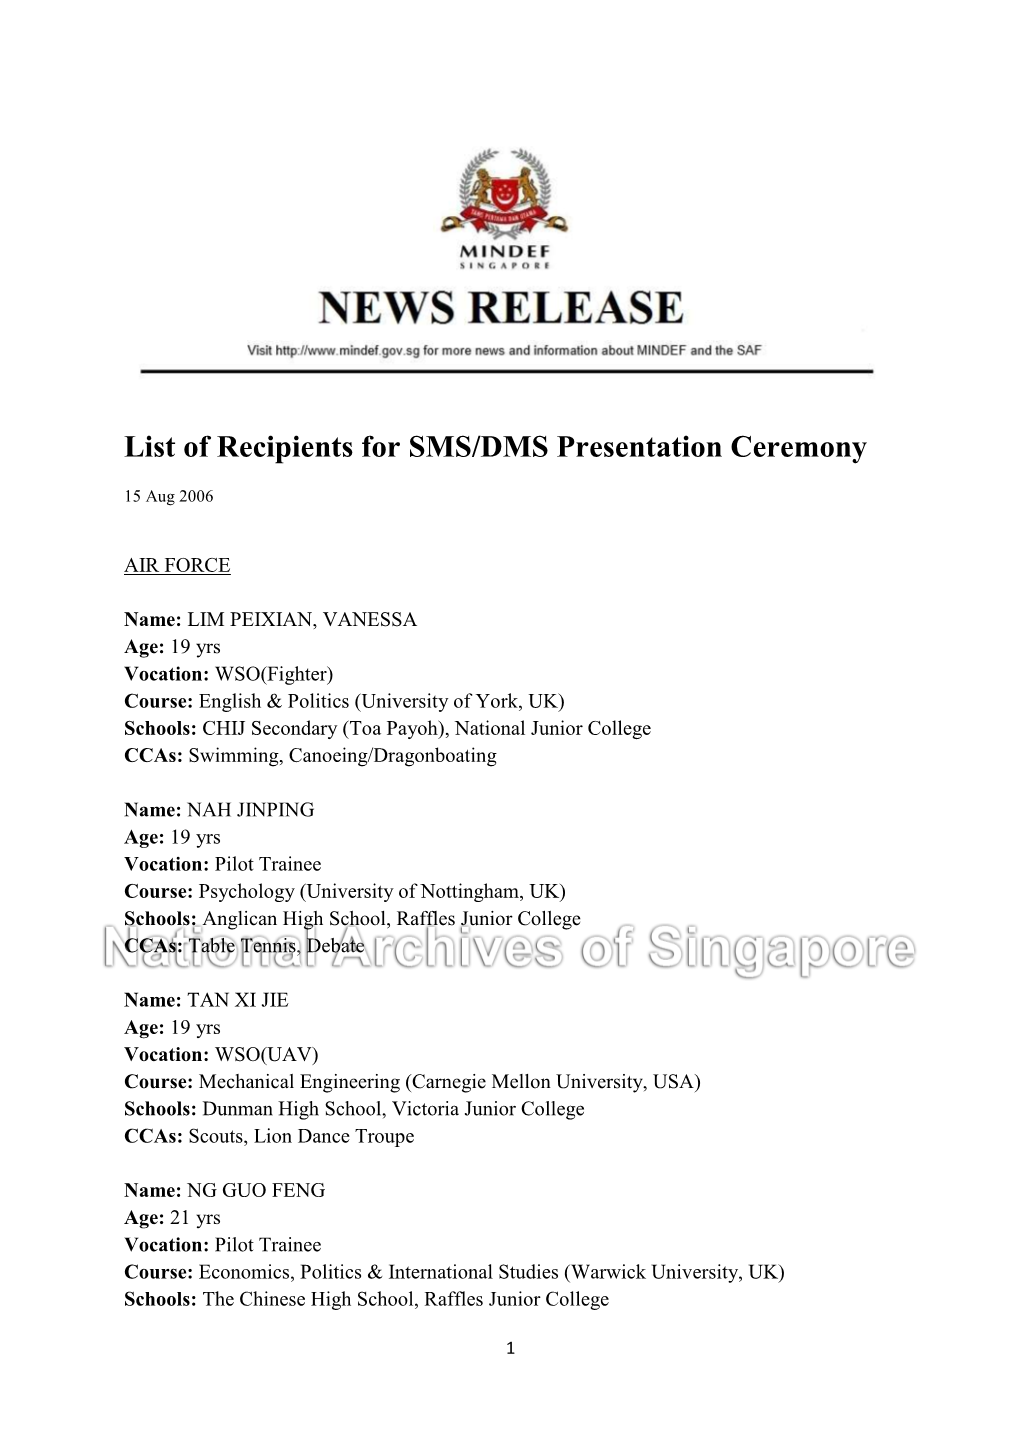 List of Recipients for SMS/DMS Presentation Ceremony